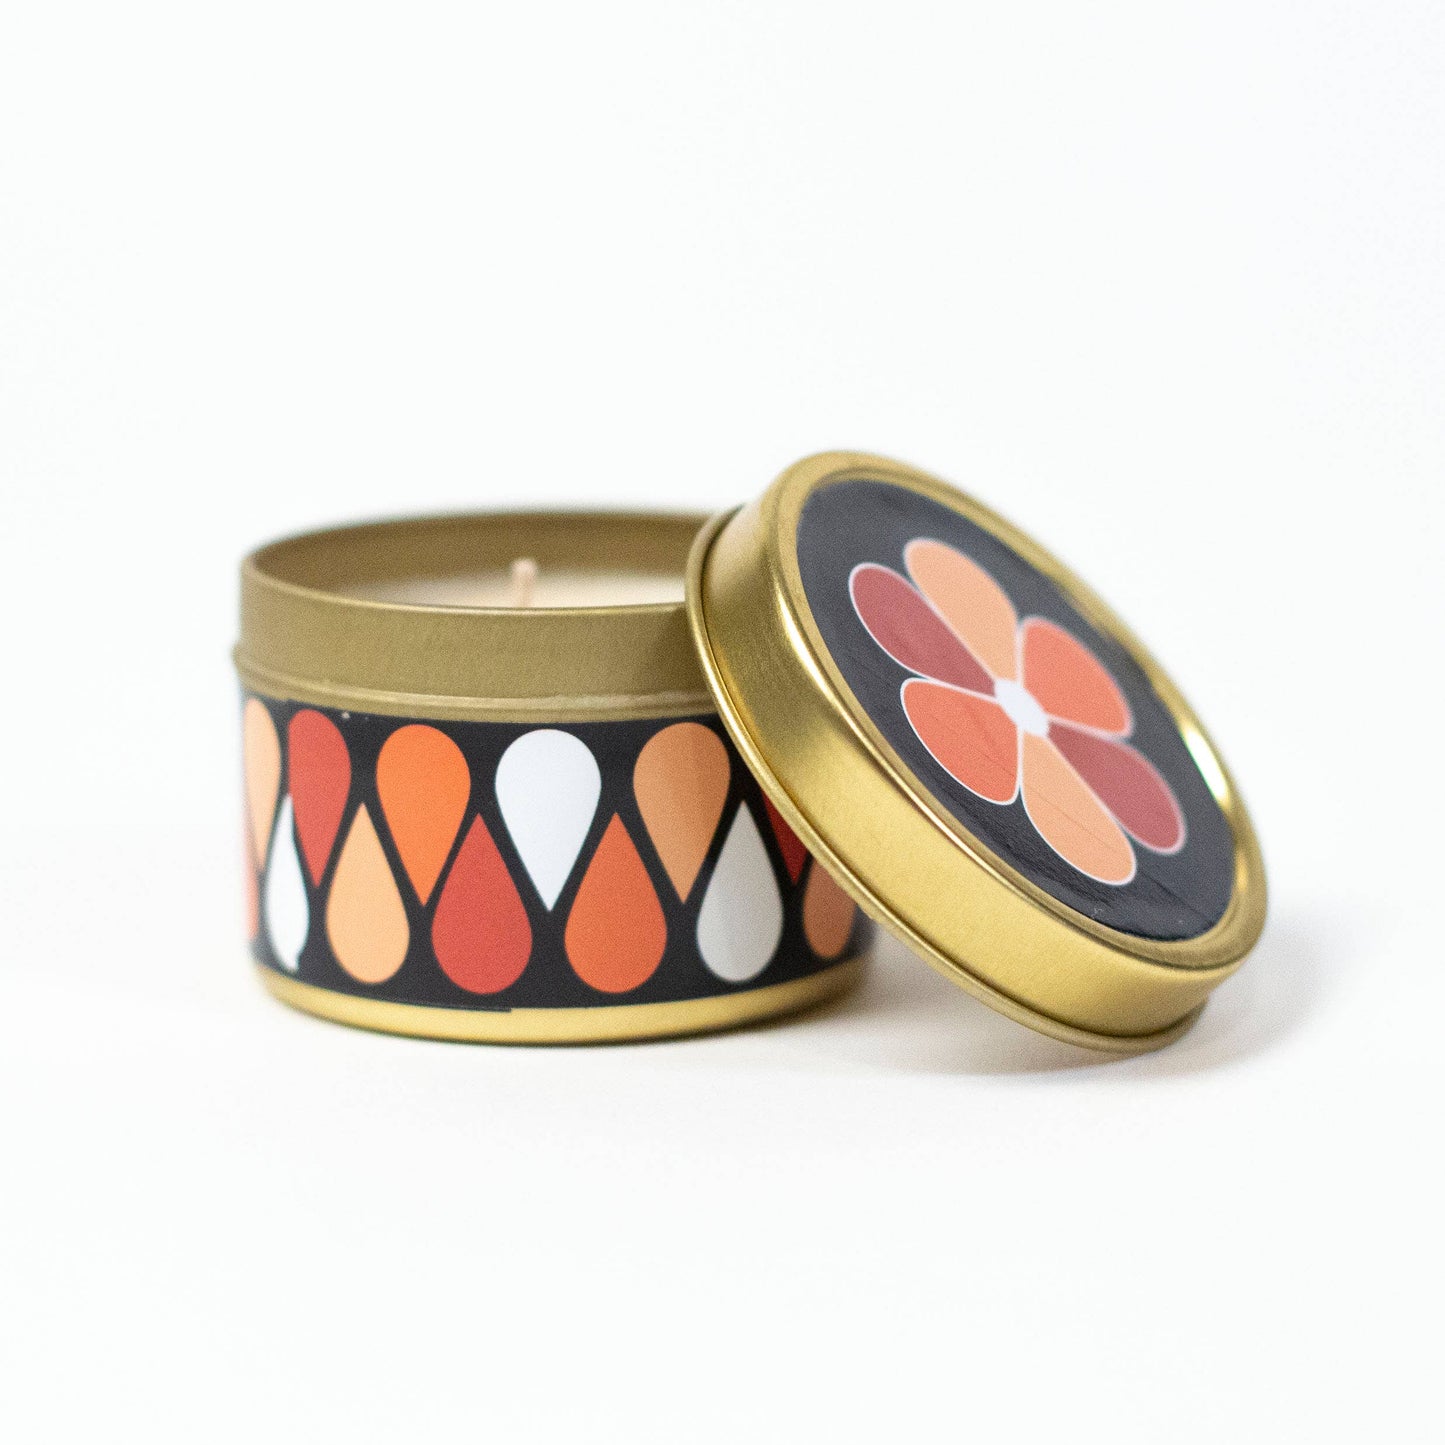 Teardrop Floral Travel Candle - Classic & Kitsch